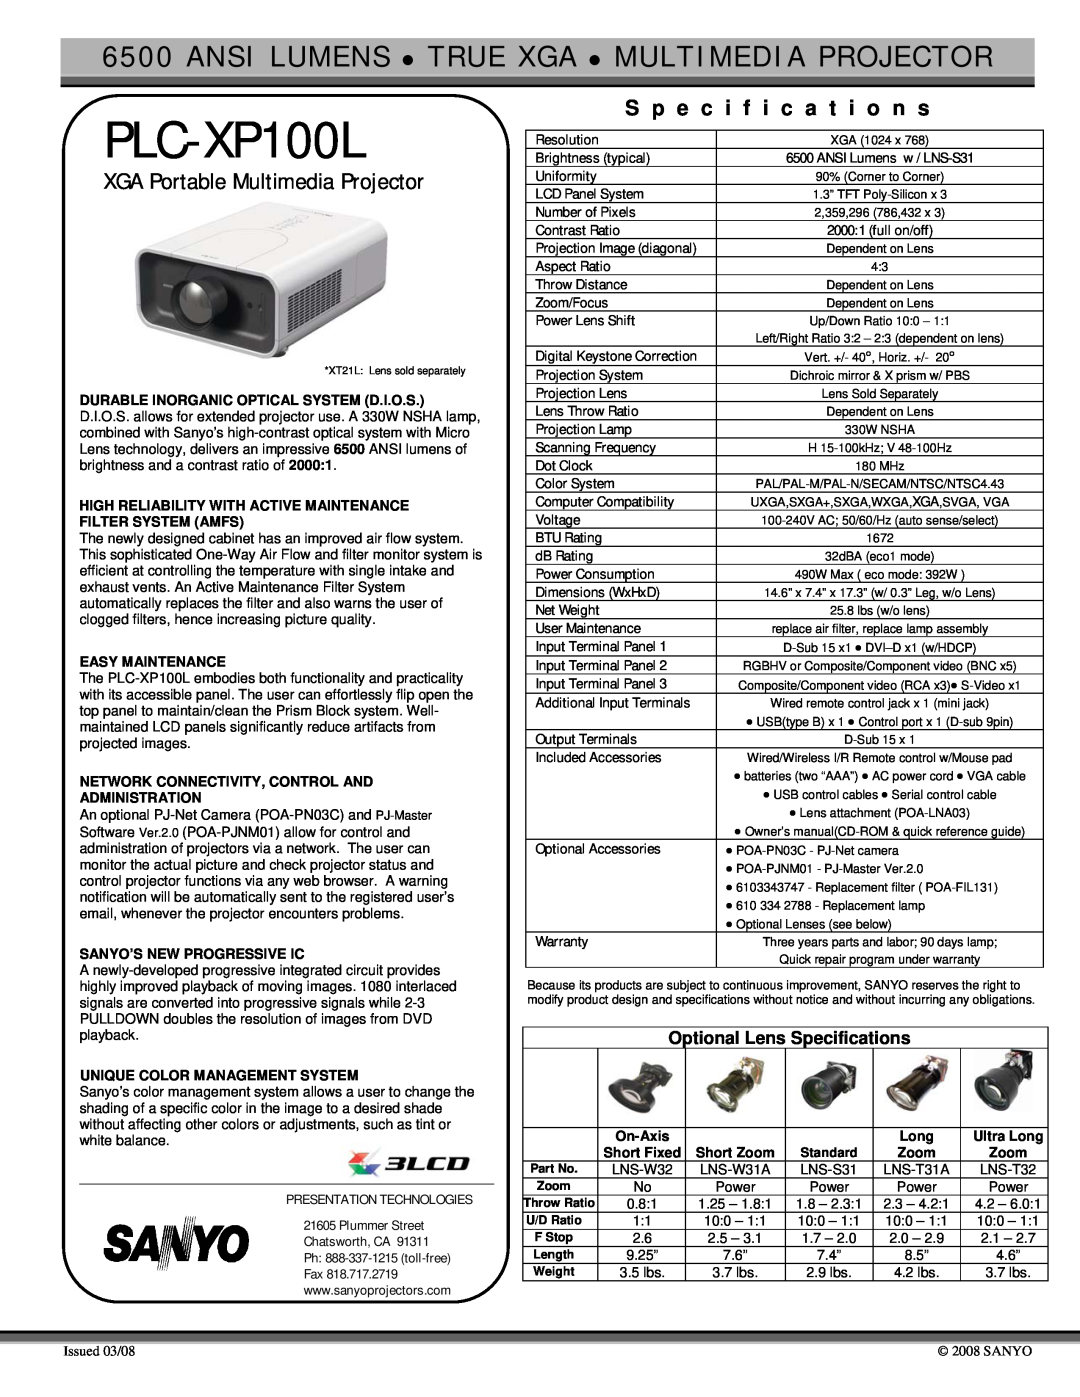 Sanyo owner manual MODEL PLC-XP100L PLC-XP100BKL, Multimedia Projector, Owner’s Manual, Projection lens is optional 